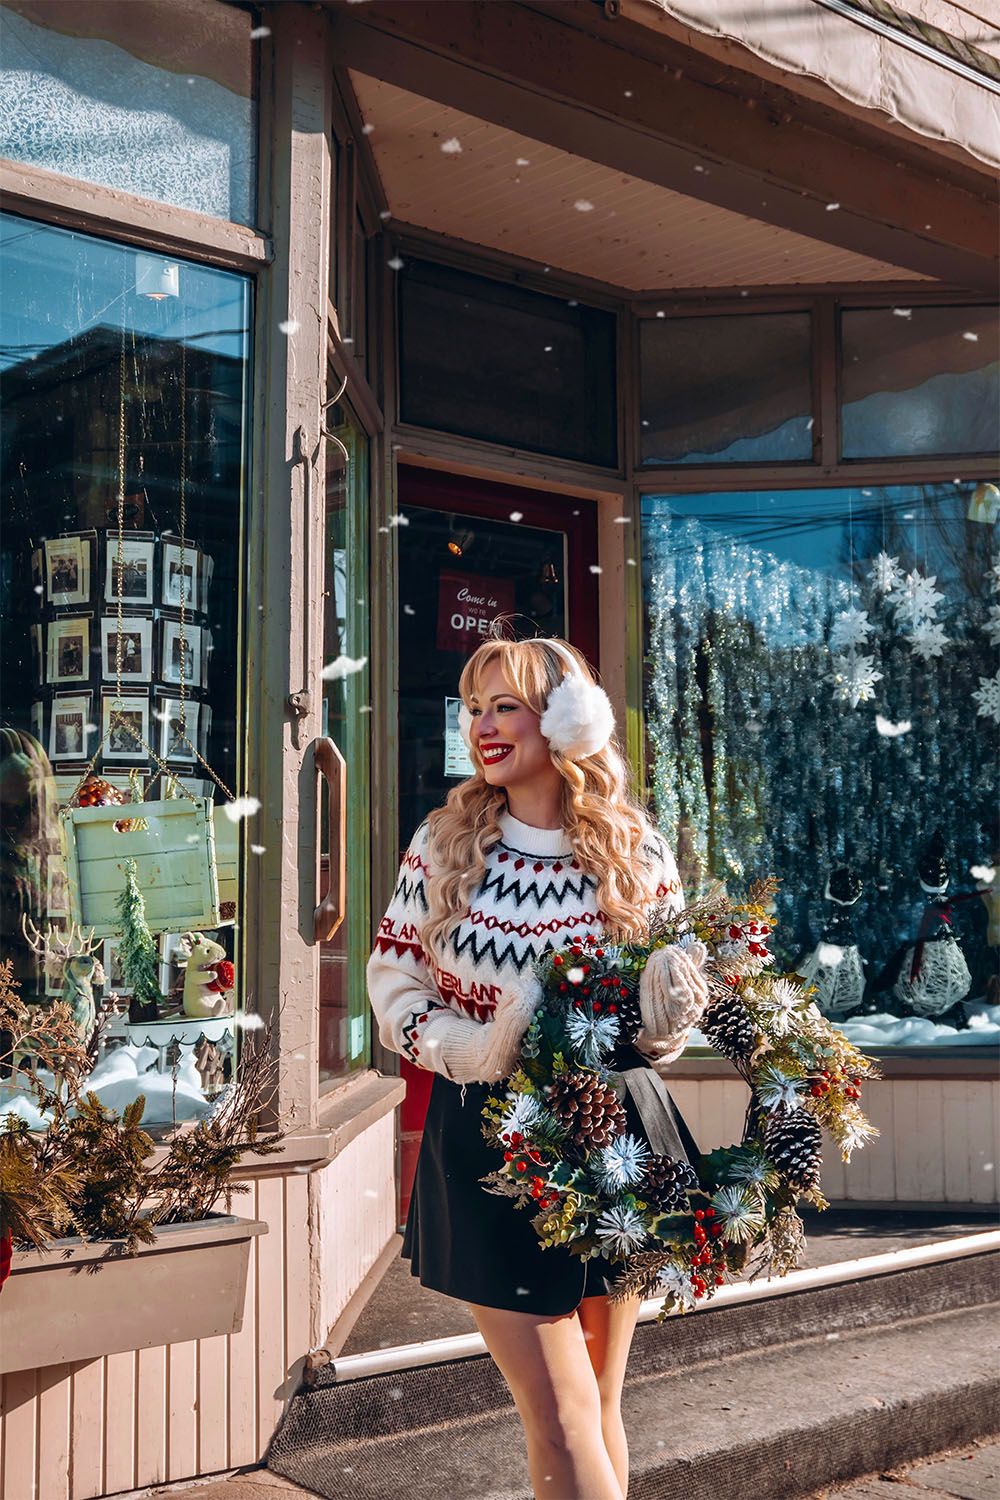 Ever wish you could step into a Hallmark Christmas movie? These 13 magical Christmas towns in Ontario will have you feeling just like you did! Pack your bags, load up the car, and get ready for the ultimate Christmas getaway - a road trip through Ontario's Christmas towns! Pictured here: Westport